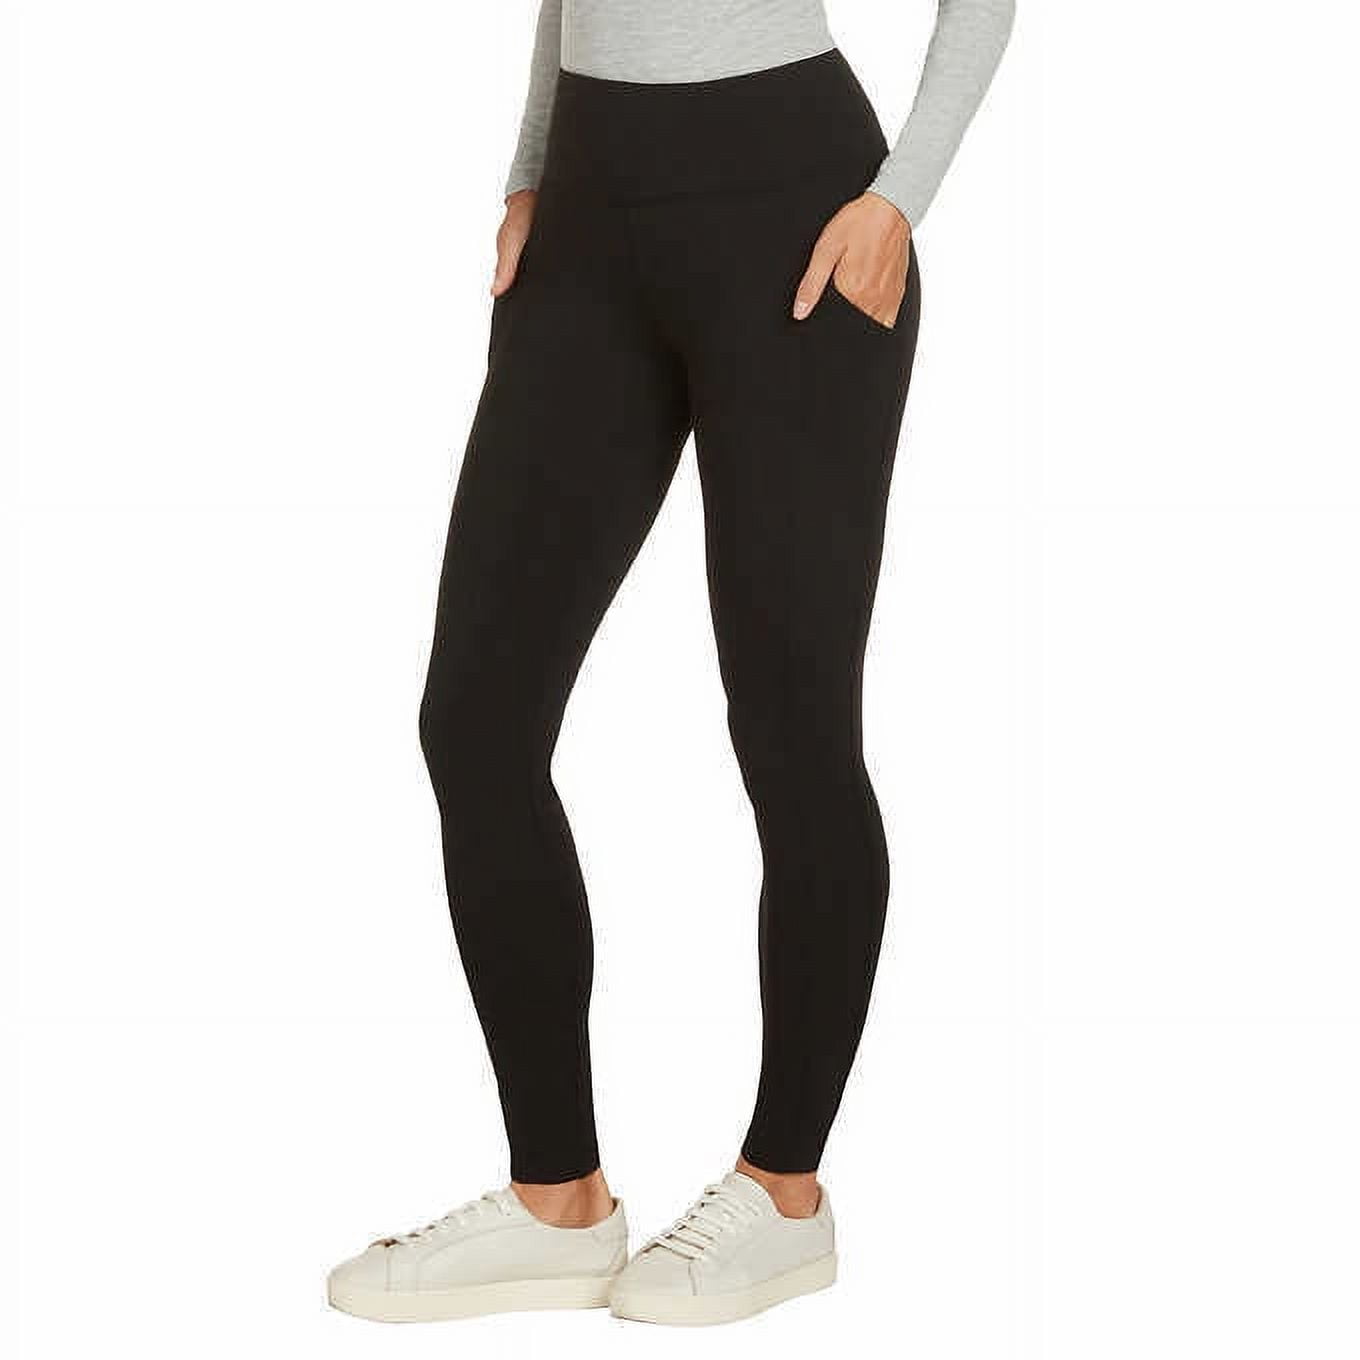 Max & Mia Ladies' French Terry Legging with Pockets 1588697 Heater